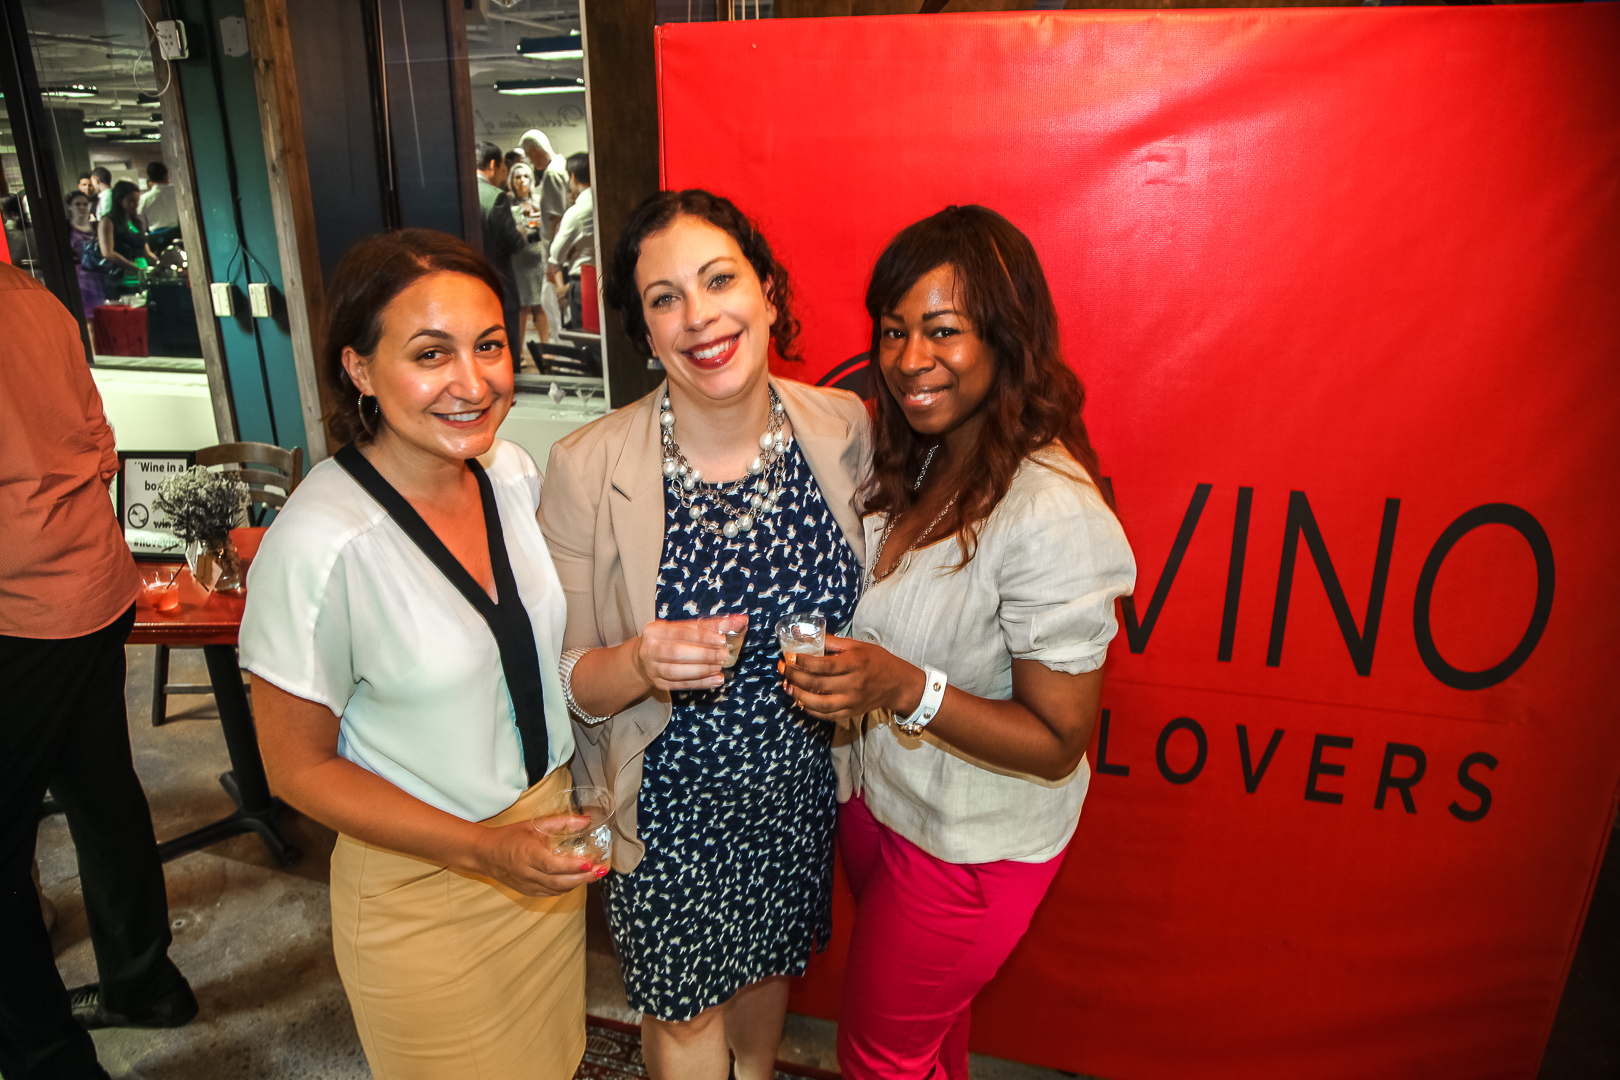 Vinolovers, No Frills Wine Club Launches